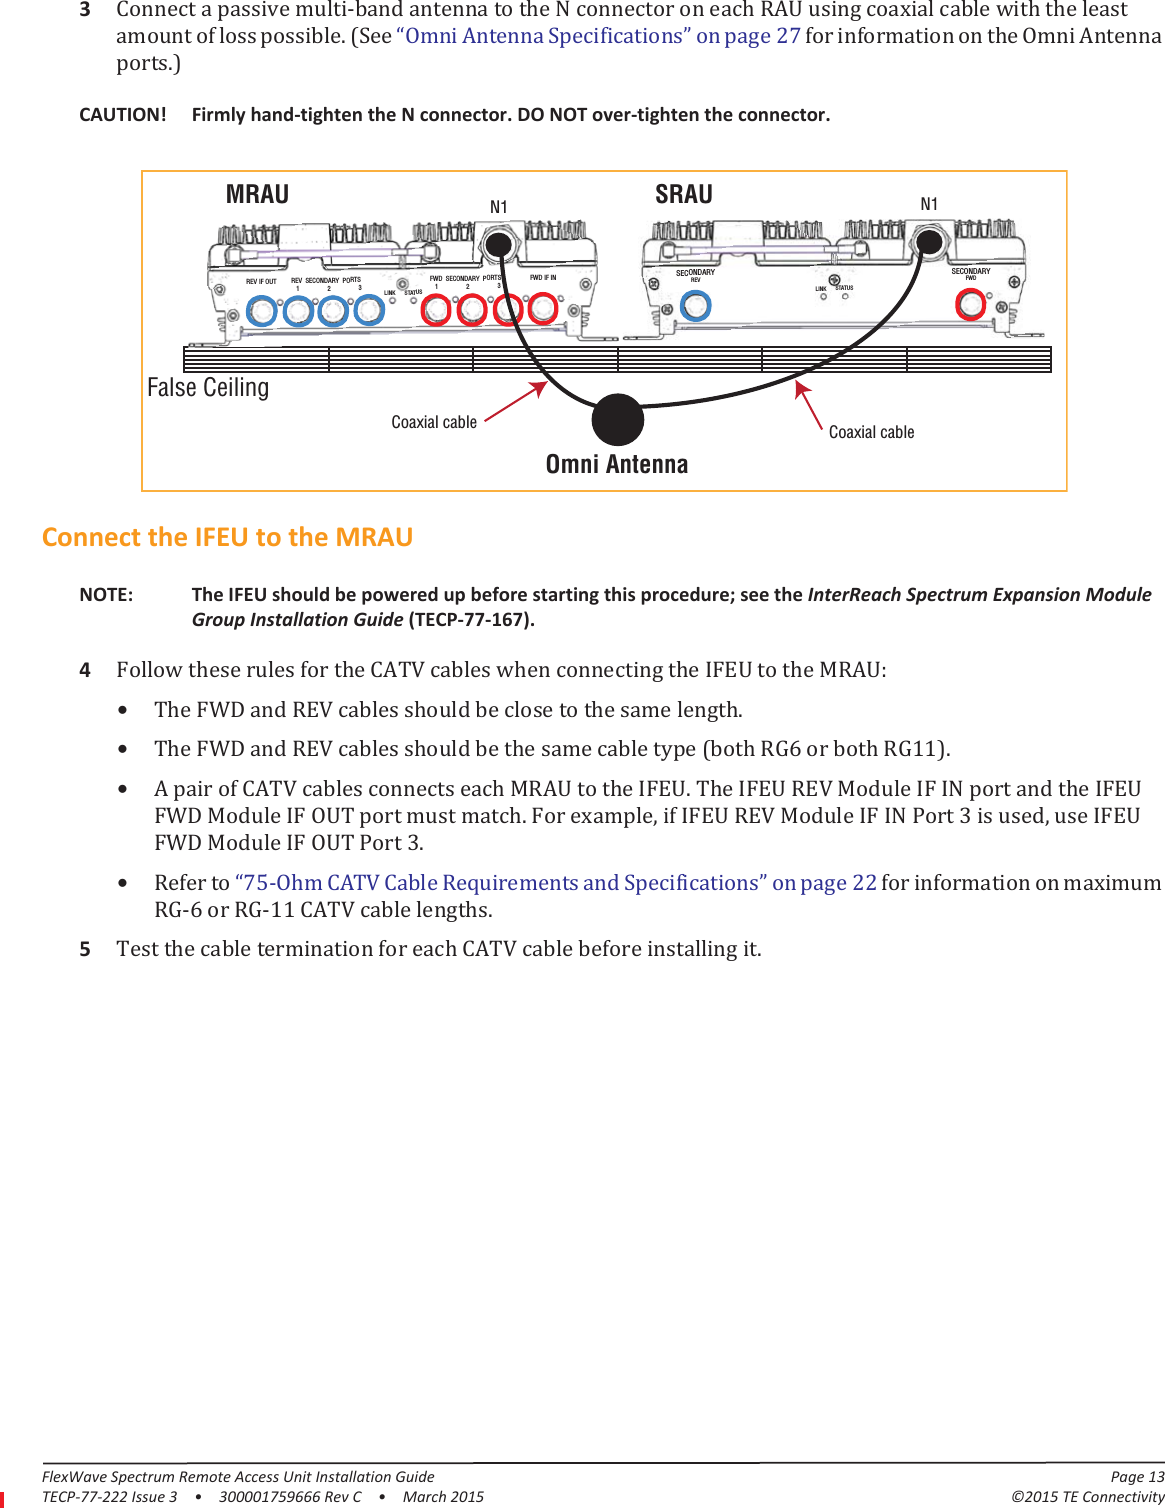 FlexWave Spectrum Remote Access Unit Installation Guide Page 13TECP-77-222 Issue 3  •  300001759666 Rev C  •  March 2015 ©2015 TE Connectivity3Connect a passive multi-band antenna to the N connector on each RAU using coaxial cable with the least amount of loss possible. (See “Omni Antenna Specifications” on page  27 for information on the Omni Antenna ports.)Omni AntennaFalse CeilingSRAU N1REV IF OUT REV  SECONDARY  PORTS   1                 2                 3FWD  SECONDARY  PORTS   1                 2                 3FWD IF INLINK STATUSLINK STATUSSECONDARYREVSECONDARYFWDMRAU N1Coaxial cableCoaxial cableCAUTION! Firmly hand-tighten the N connector. DO NOT over-tighten the connector.Connect the IFEU to the MRAUNOTE: The IFEU should be powered up before starting this procedure; see the InterReach Spectrum Expansion Module Group Installation Guide (TECP-77-167).4Follow these rules for the CATV cables when connecting the IFEU to the MRAU:•The FWD and REV cables should be close to the same length.•The FWD and REV cables should be the same cable type (both RG6 or both RG11).•A pair of CATV cables connects each MRAU to the IFEU. The IFEU REV Module IF IN port and the IFEU FWD Module IF OUT port must match. For example, if IFEU REV Module IF IN Port 3 is used, use IFEU FWD Module IF OUT Port 3.•Refer to “75-Ohm CATV Cable Requirements and Specifications” on page  22 for information on maximum RG-6 or RG-11 CATV cable lengths.5Test the cable termination for each CATV cable before installing it.